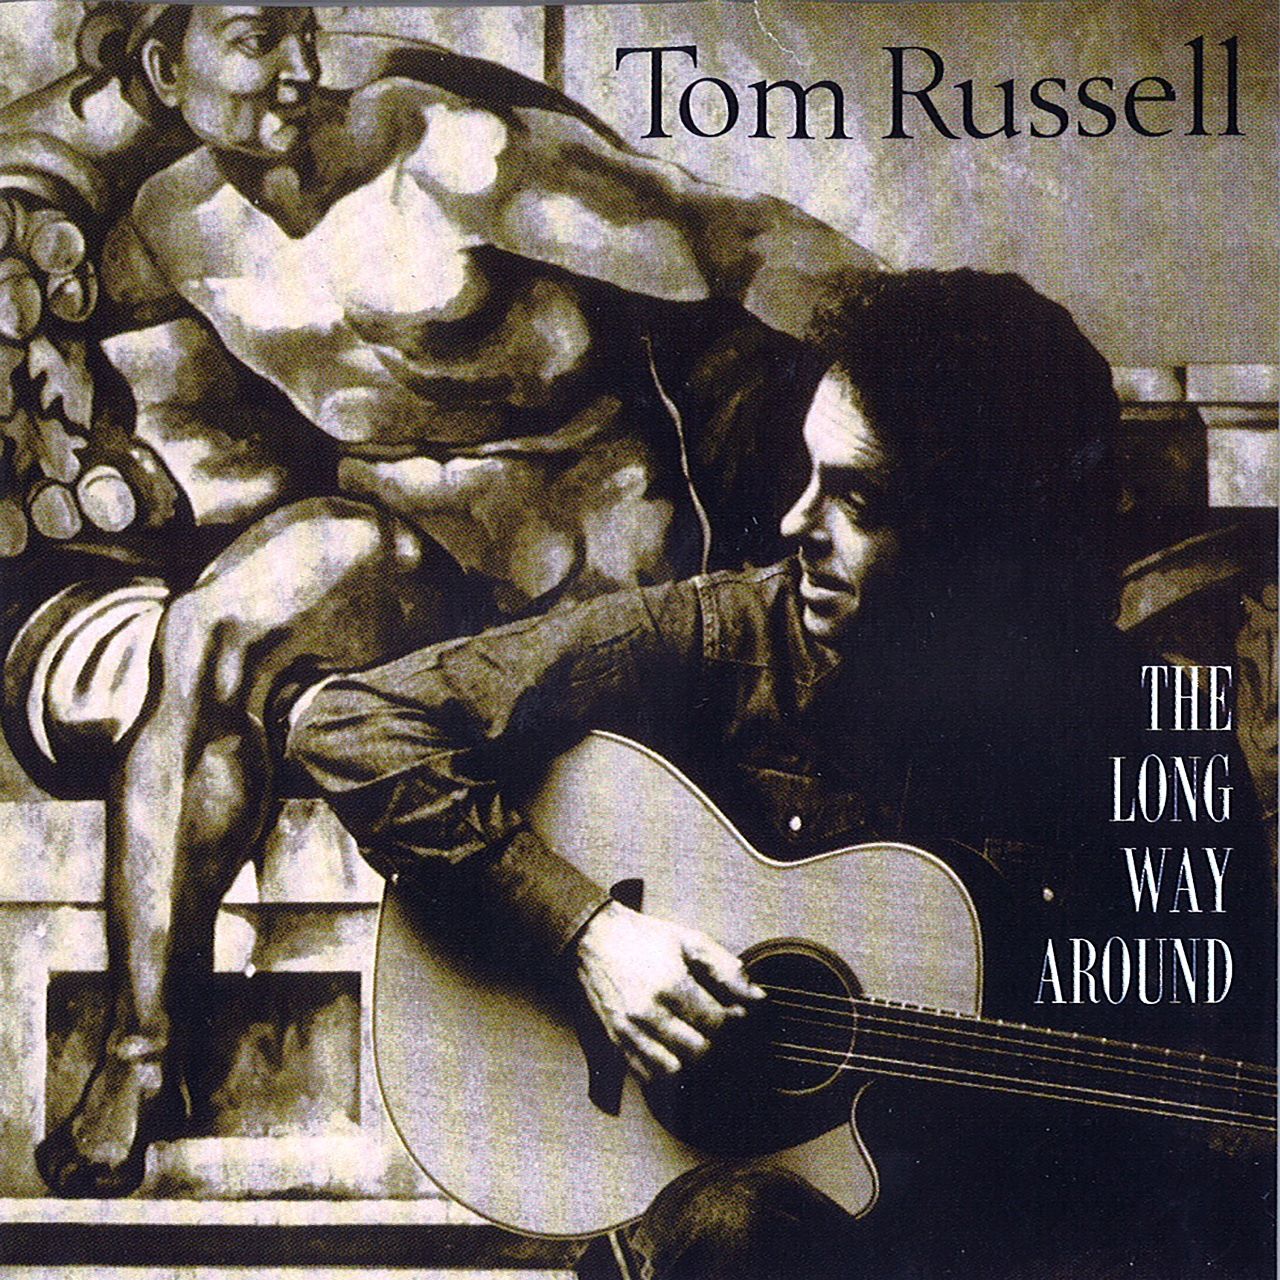 Tom Russell - The Long Way Around cover album